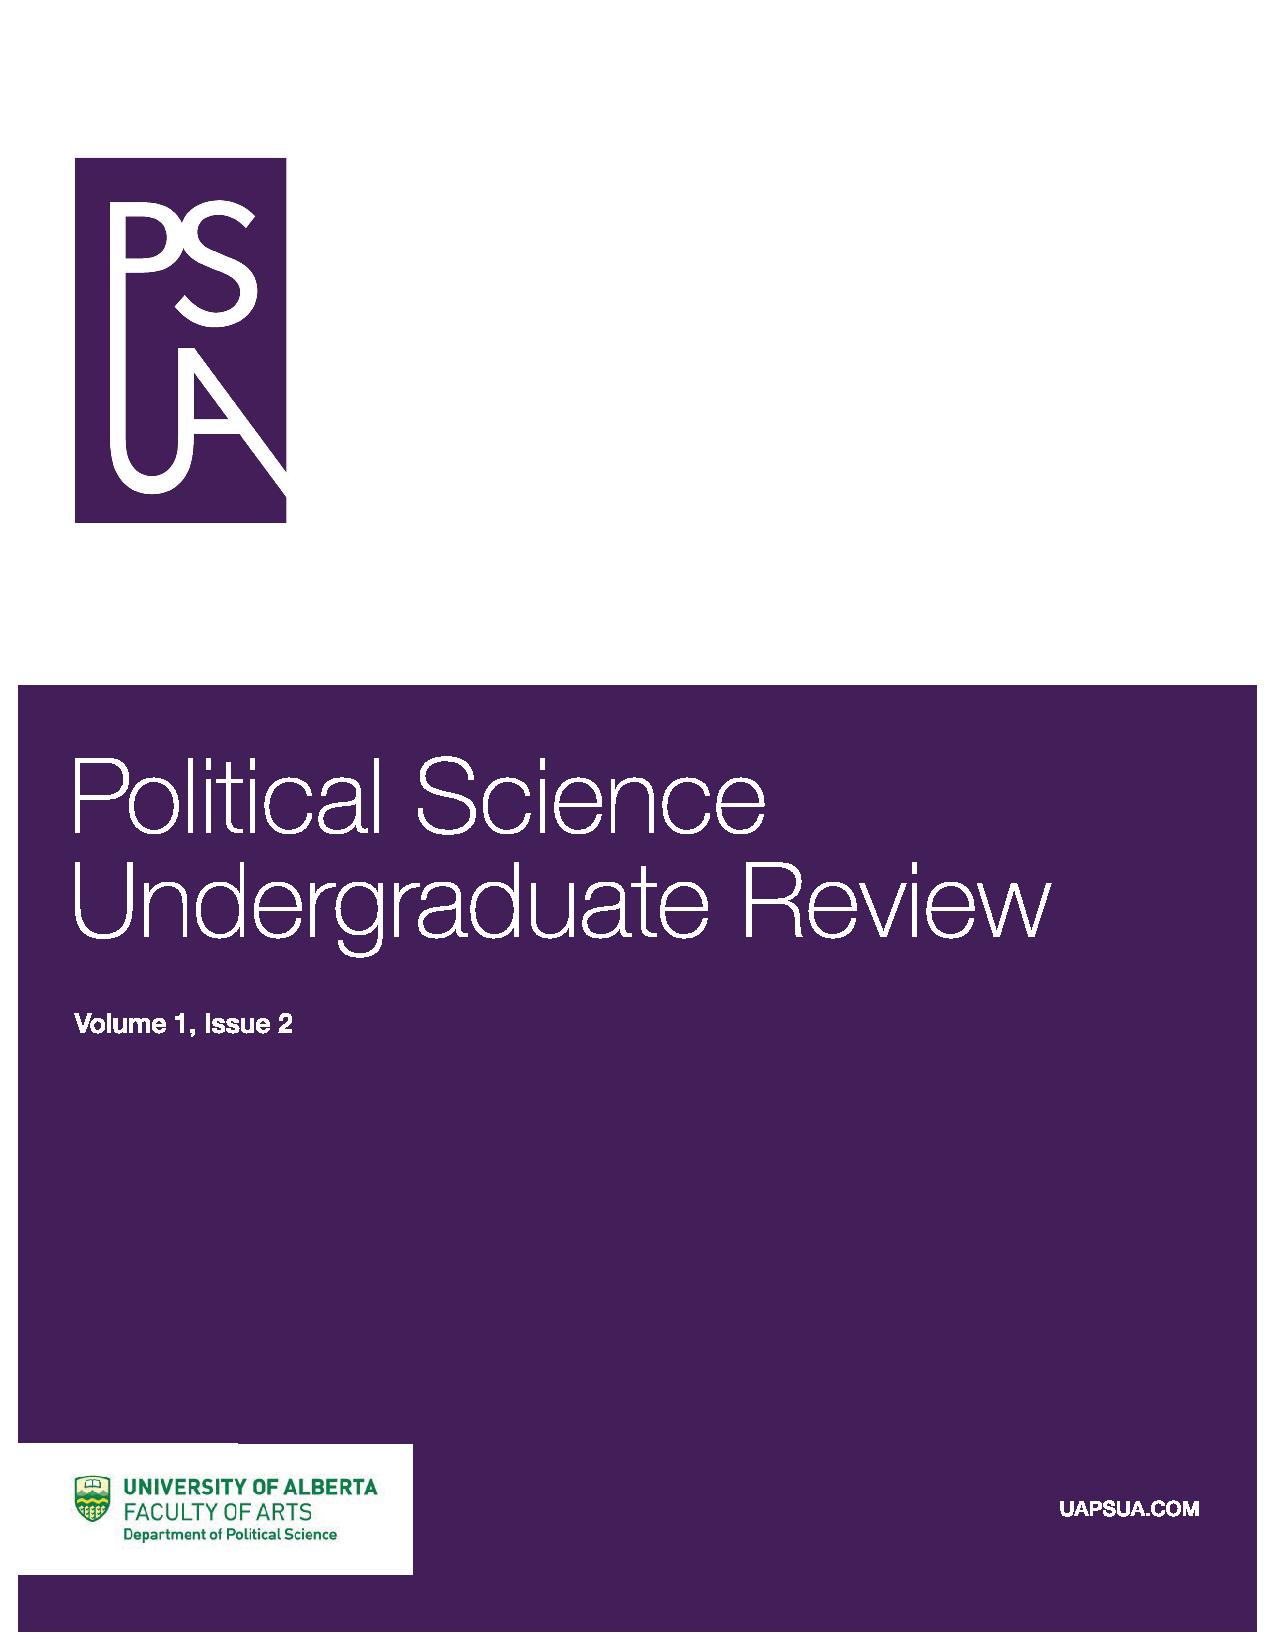 					View Vol. 1 No. 2 (2016): Political Science Undergraduate Review: Vol 1, Issue 2
				